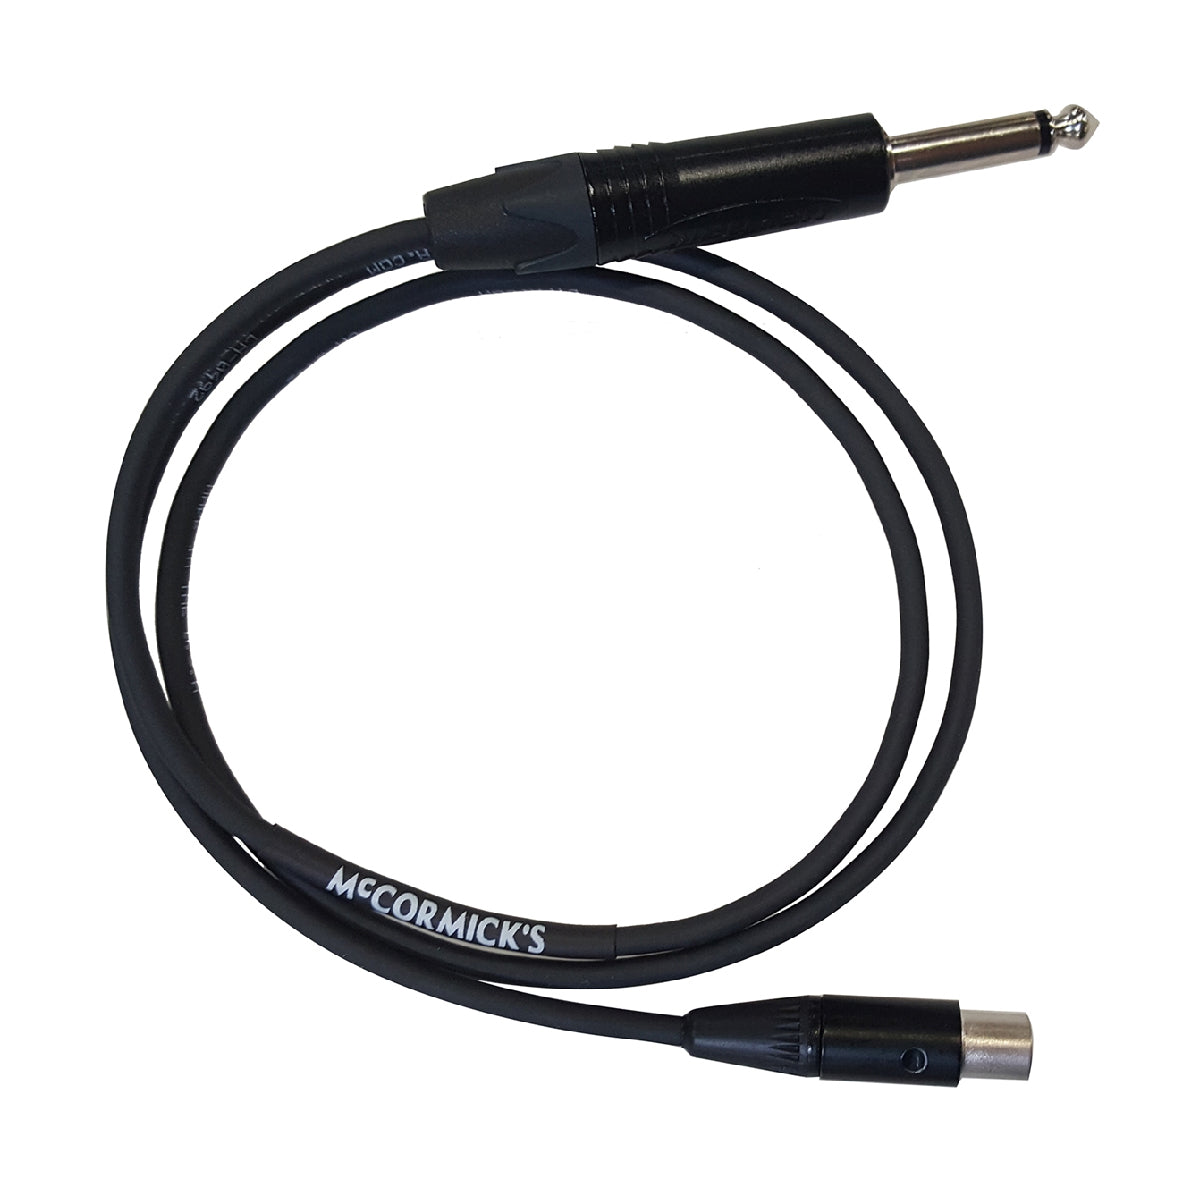 McCormick’s Wireless Metronome Adapter Cable